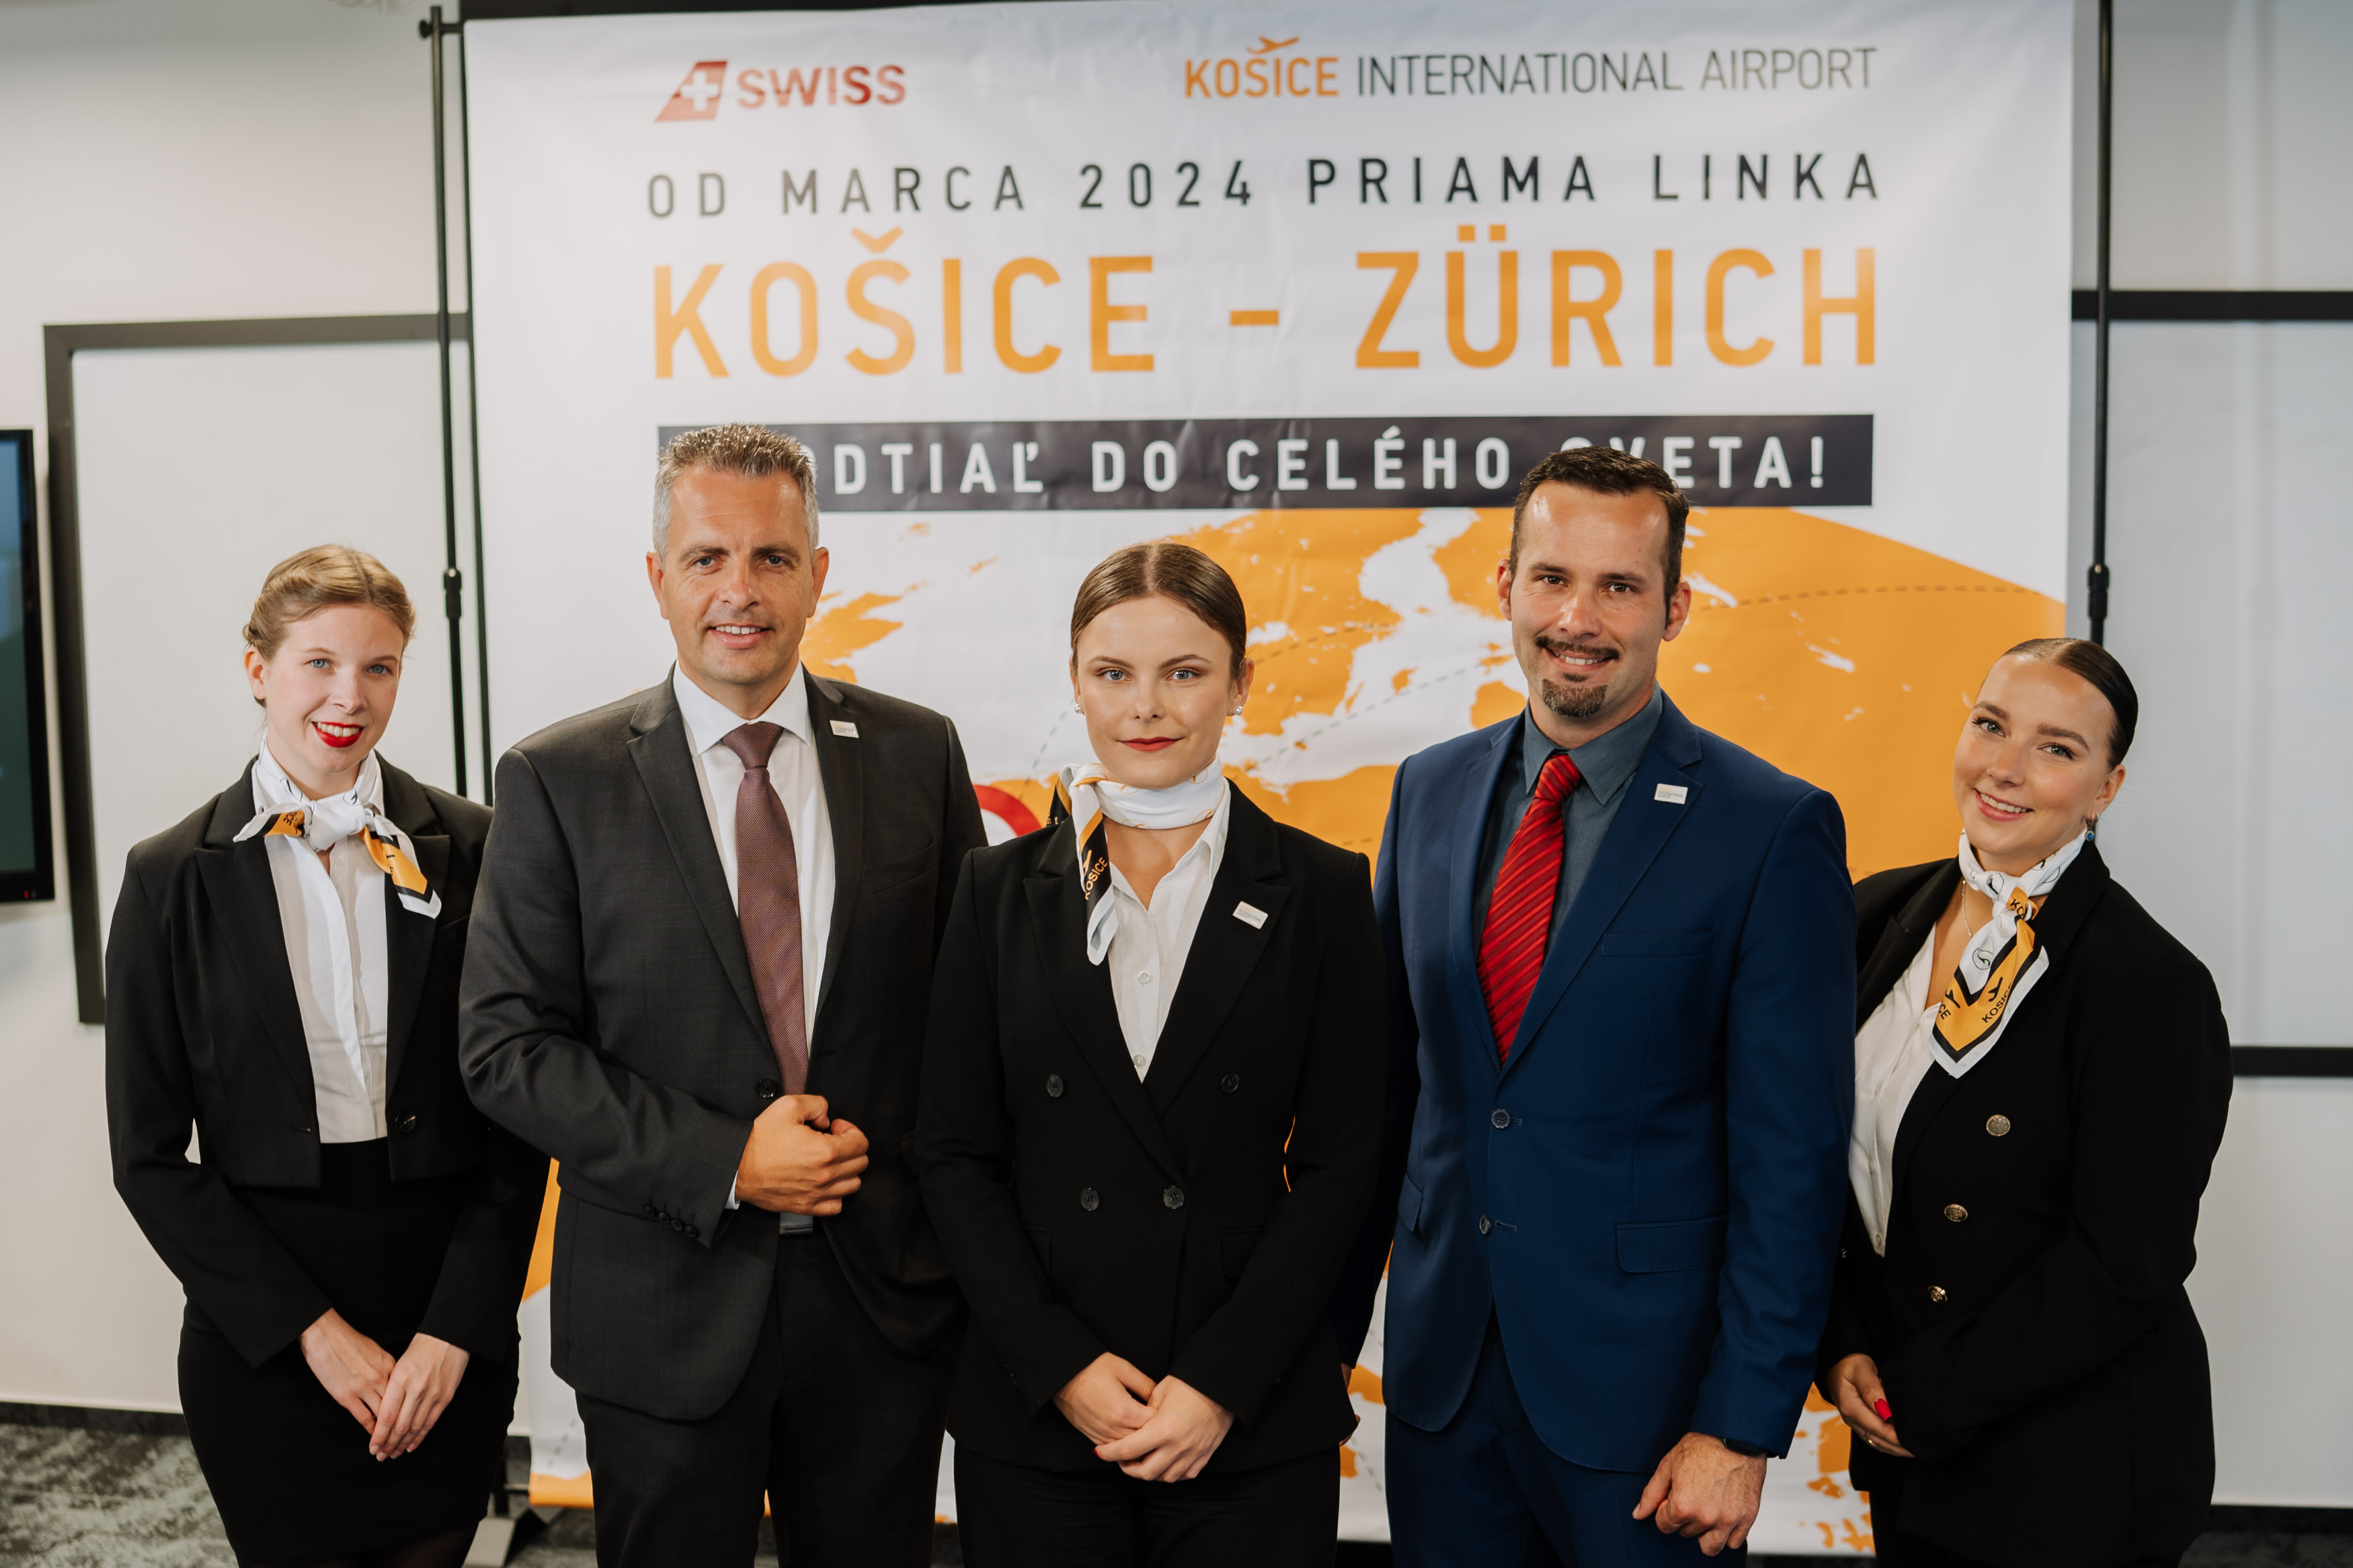 New route from Kosice to Zurich Swiss